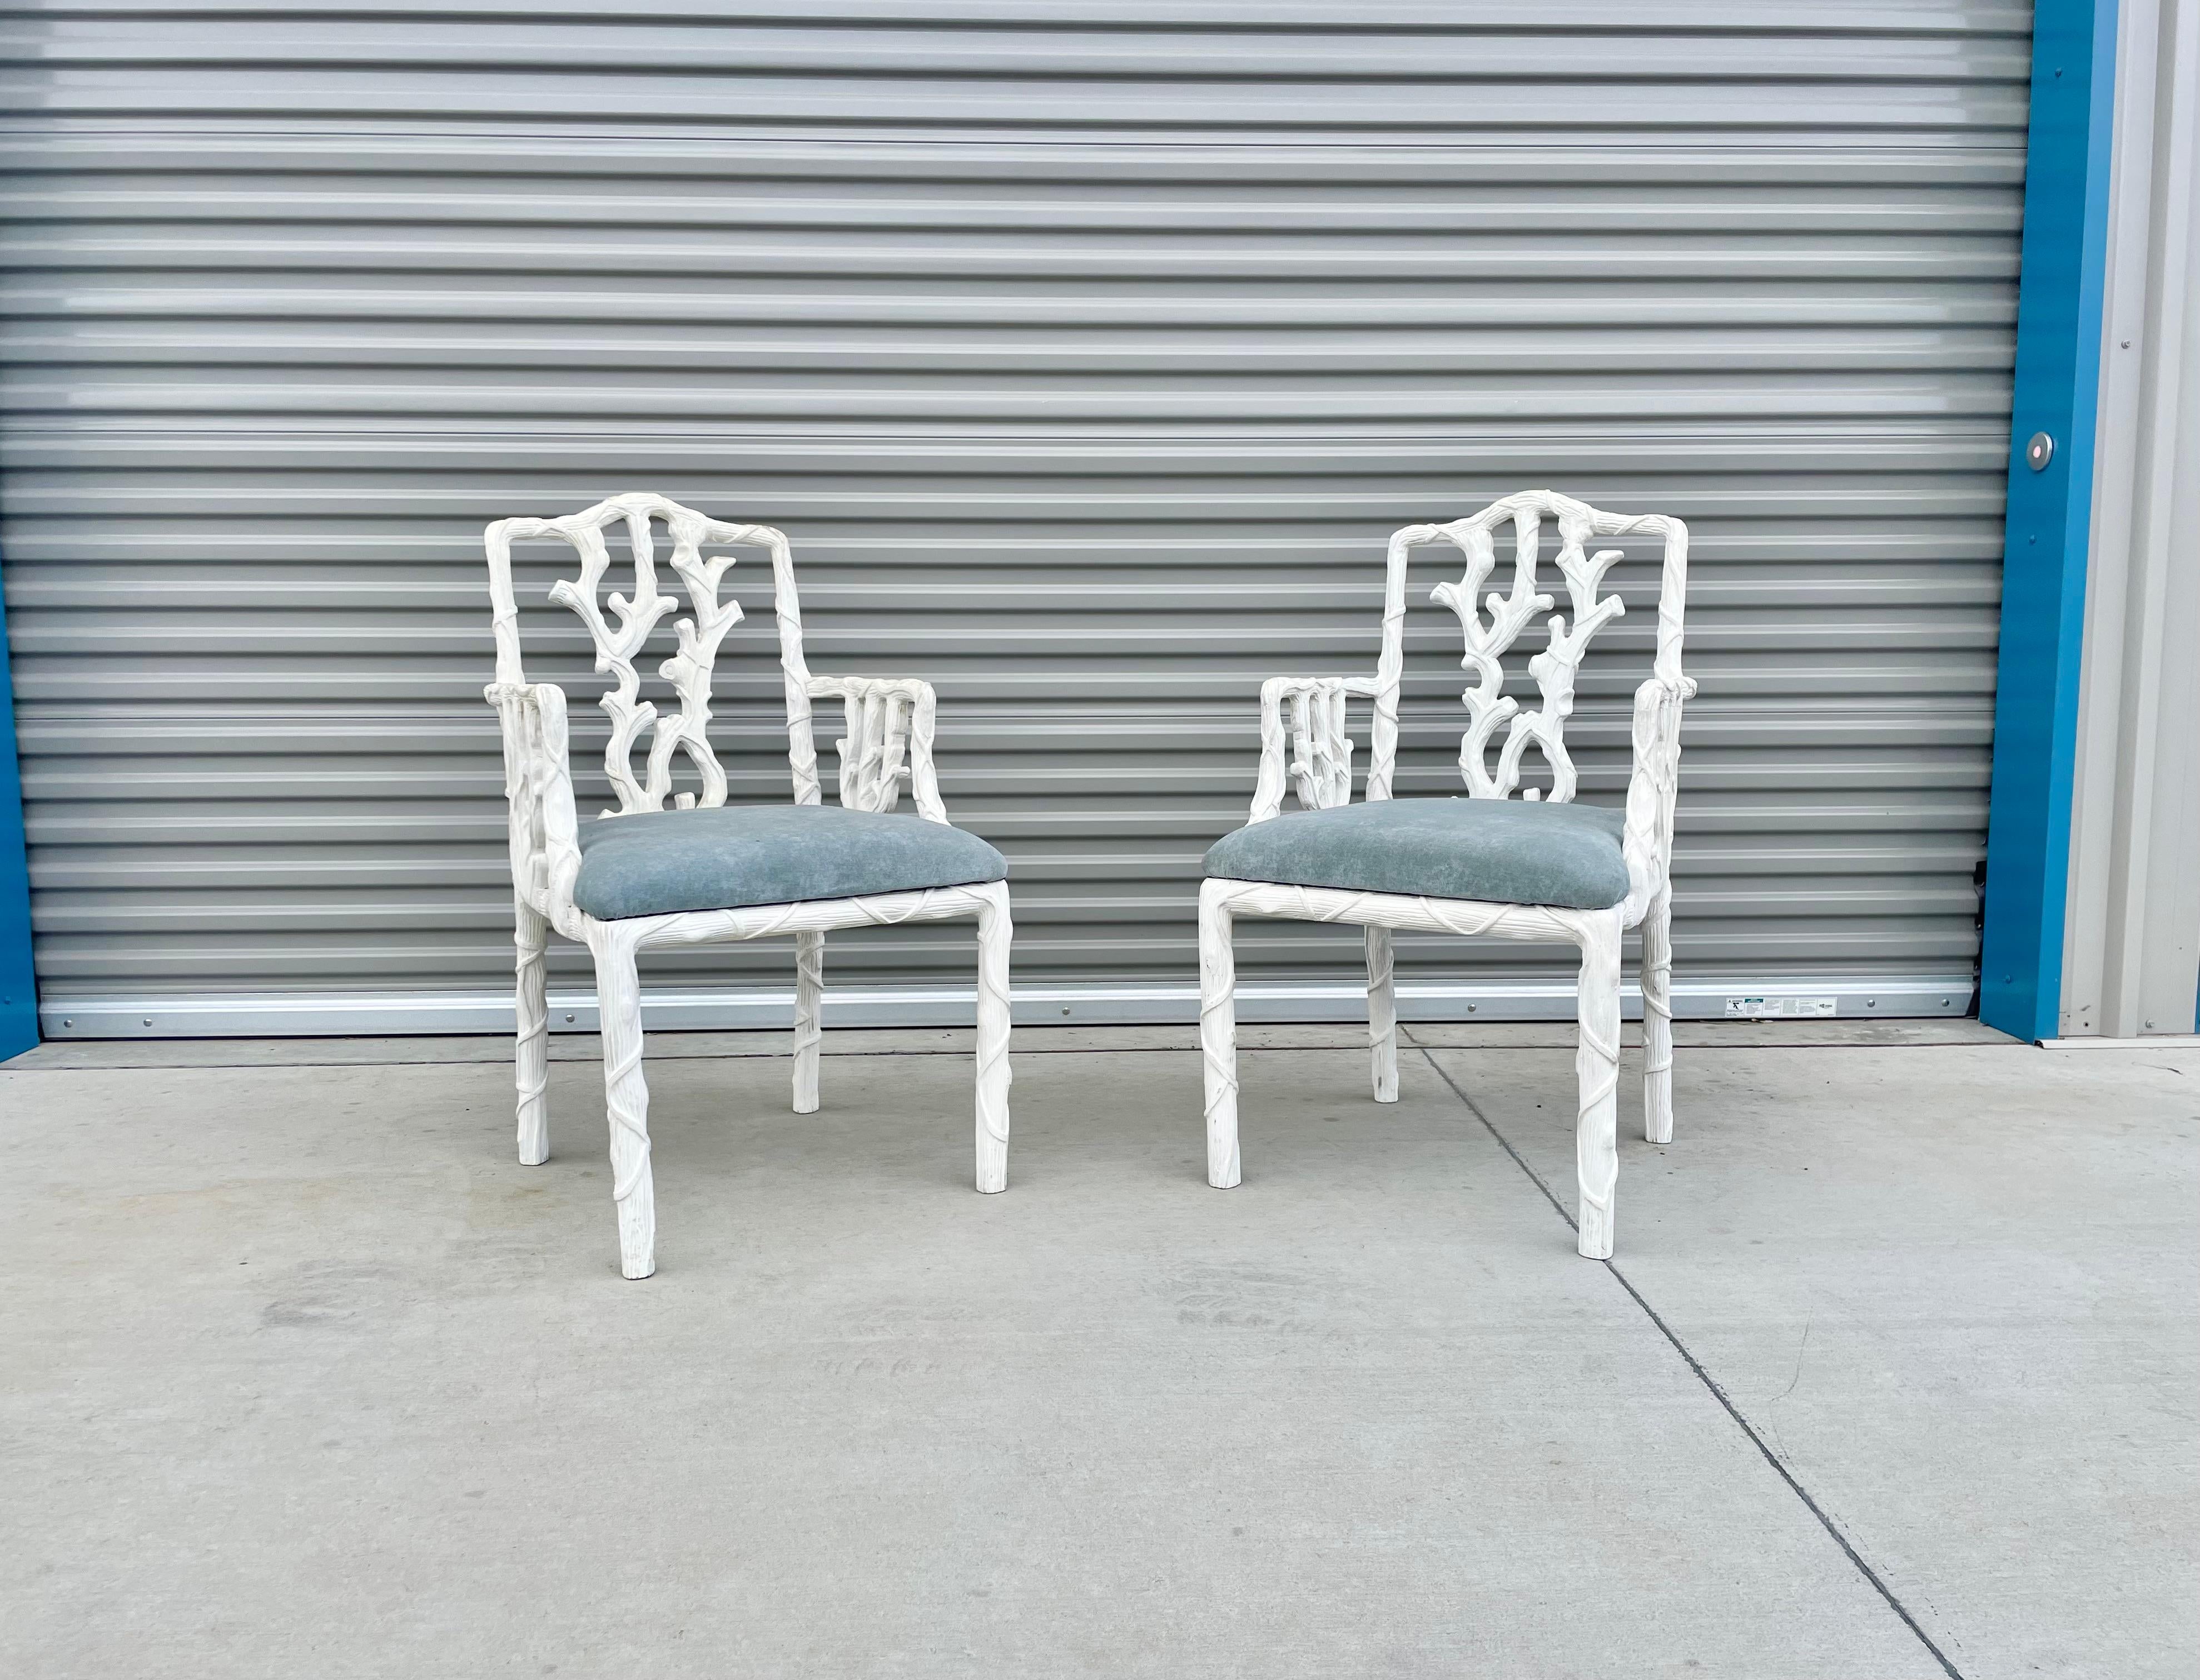 Vintage pair of armchairs designed and manufactured in France circa 1950s. These beautiful lounge chairs feature a wood base covered in a white lacquer paint. The chairs also feature a unique sculpture wood design that covers the backrest and